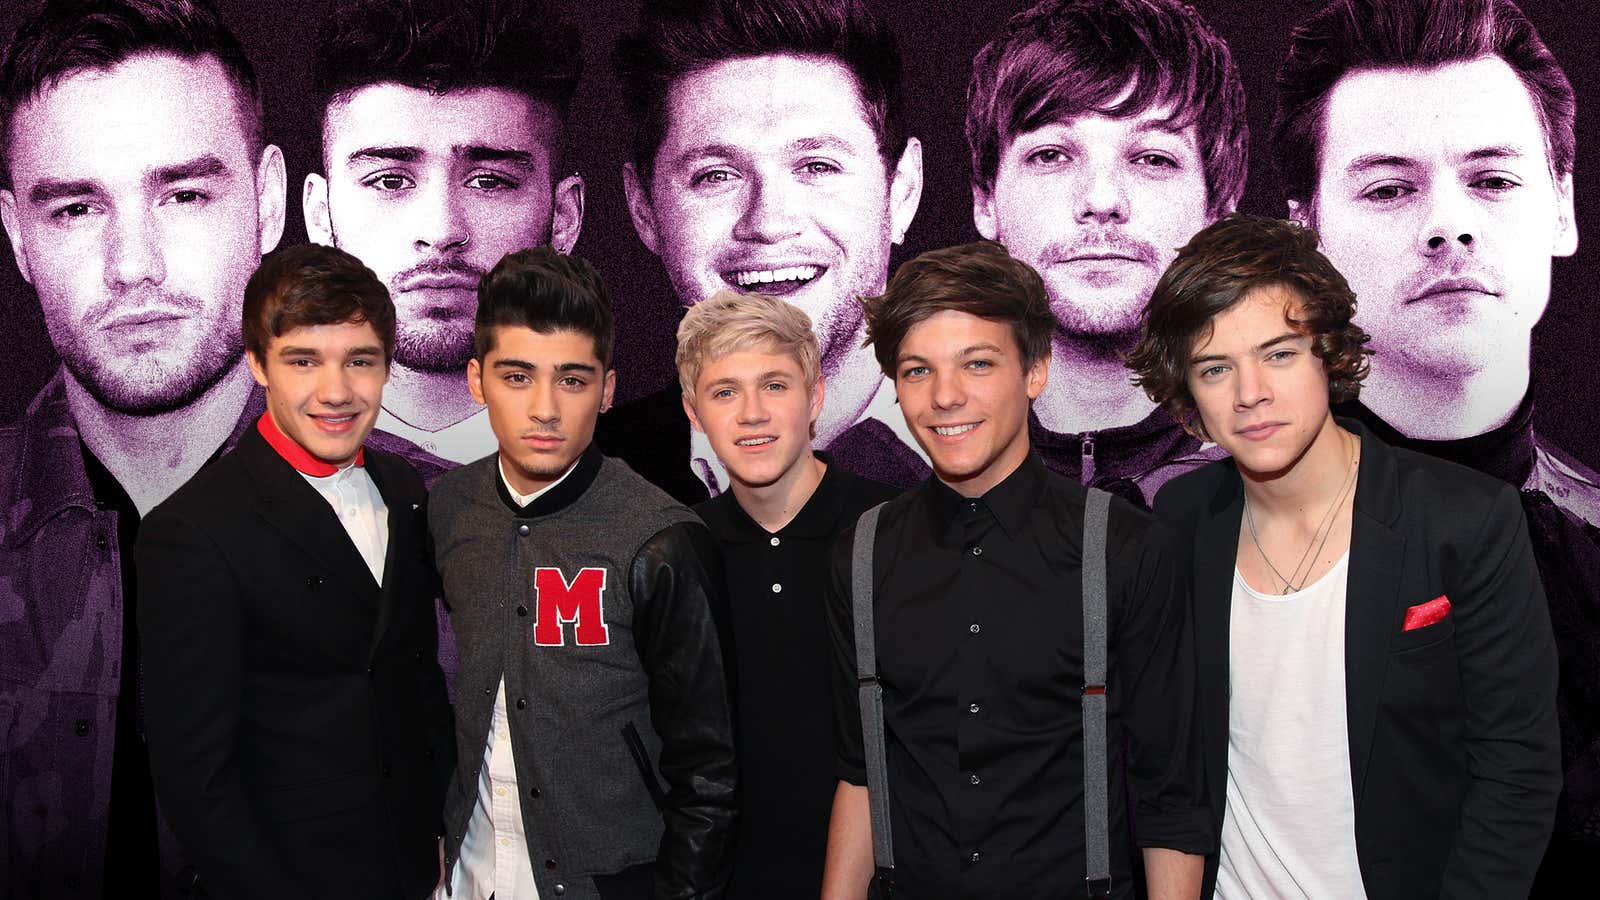 Ten years of One Direction: A look at the boy band's evolution